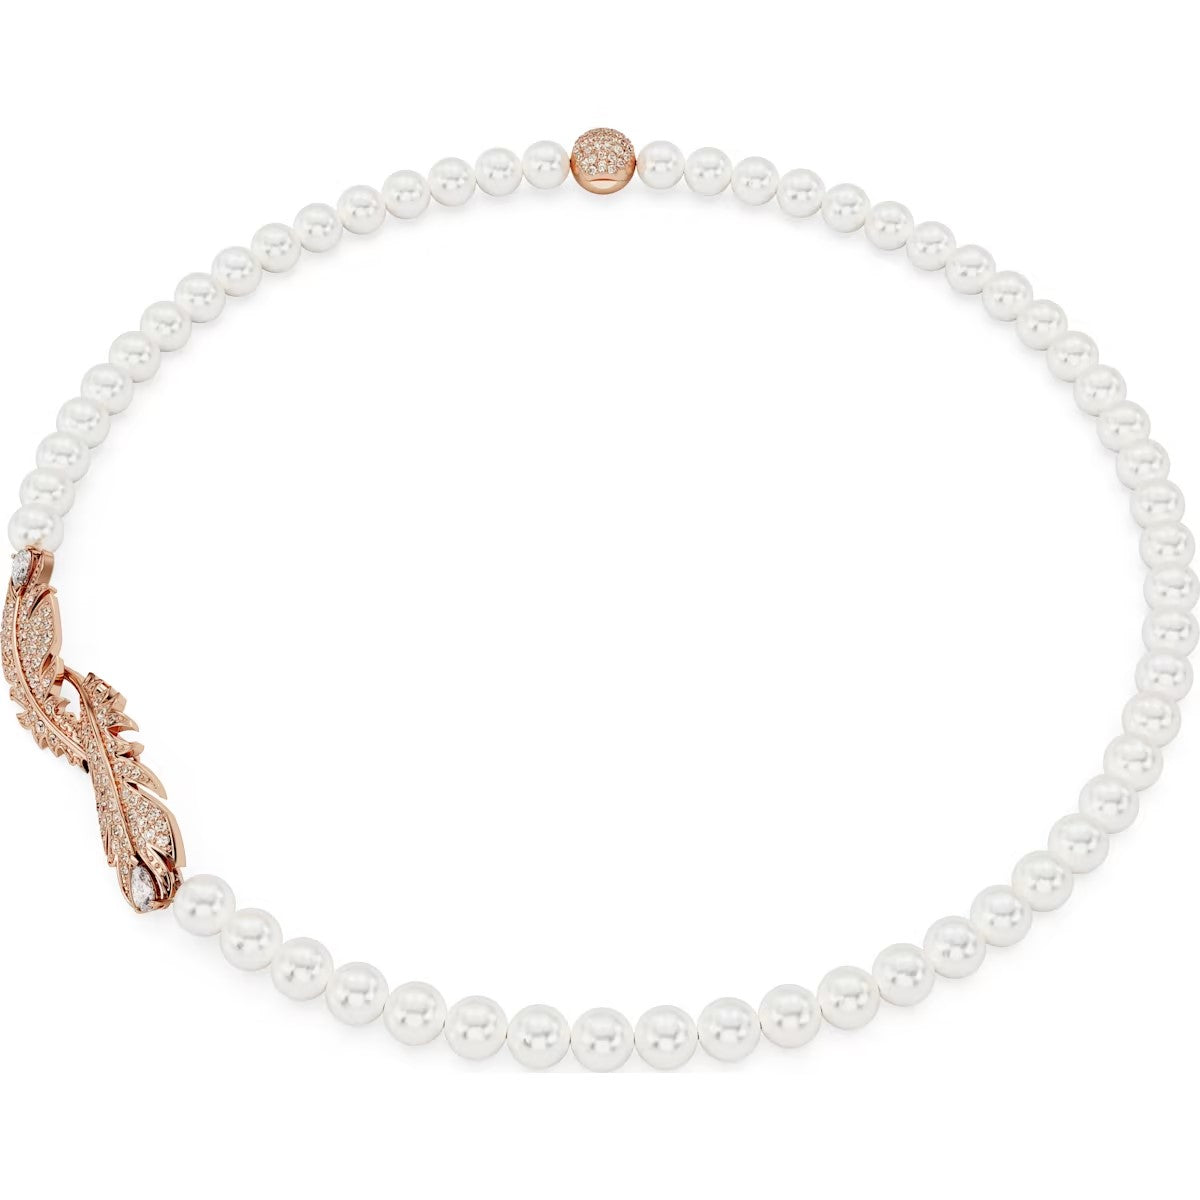 Swarovski Nice necklace, Feather, White, Rose gold-tone plated 5669221